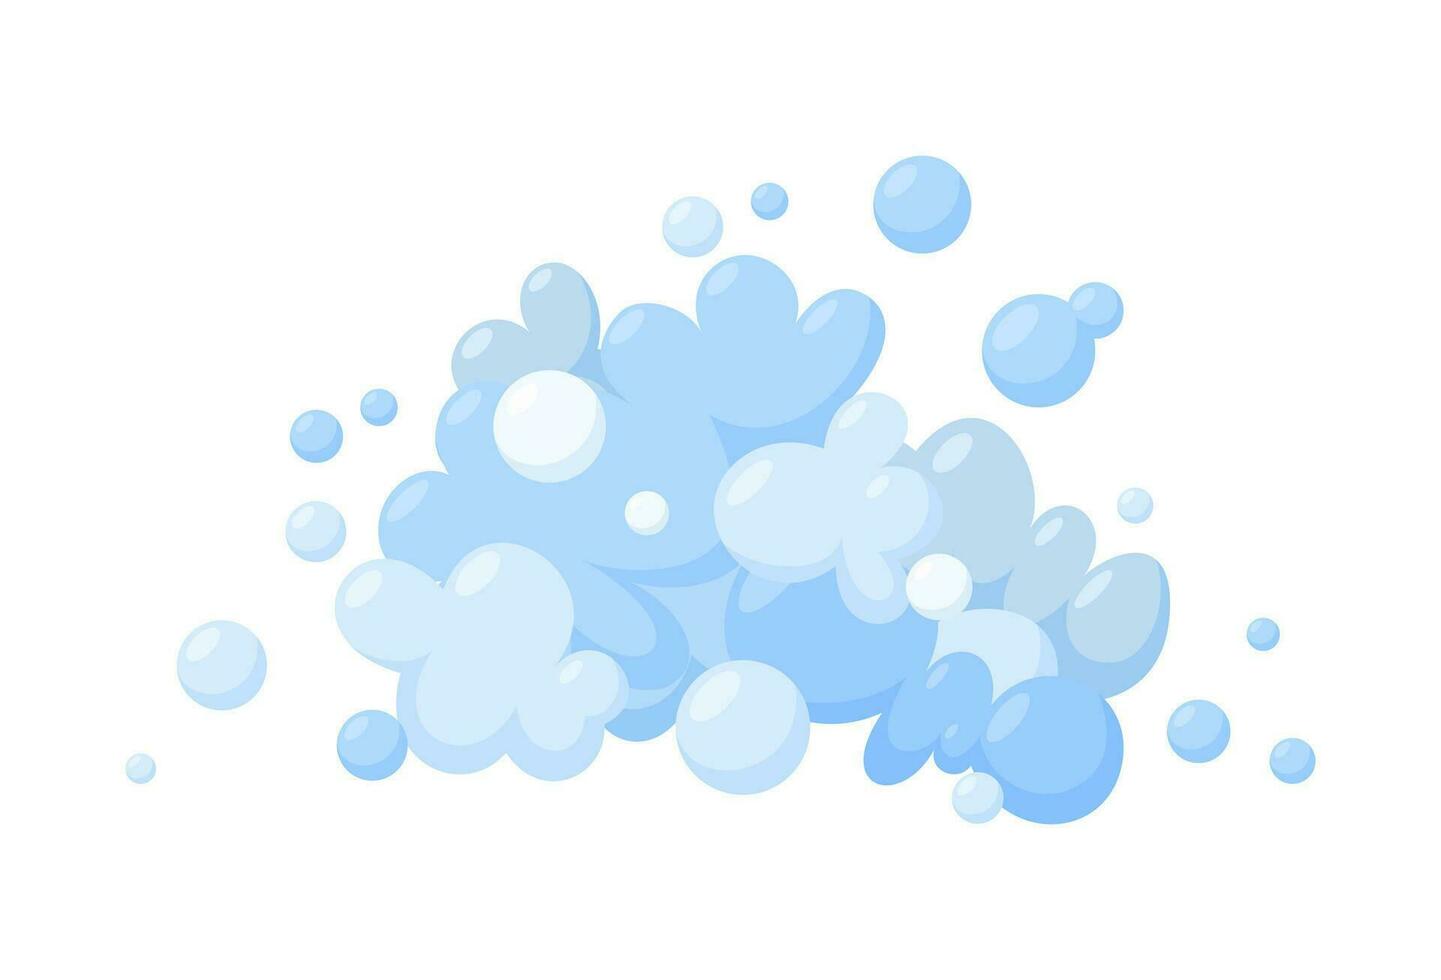 Foam made of soap. Light blue foam and bubbles. Vector illustration in cartoon style